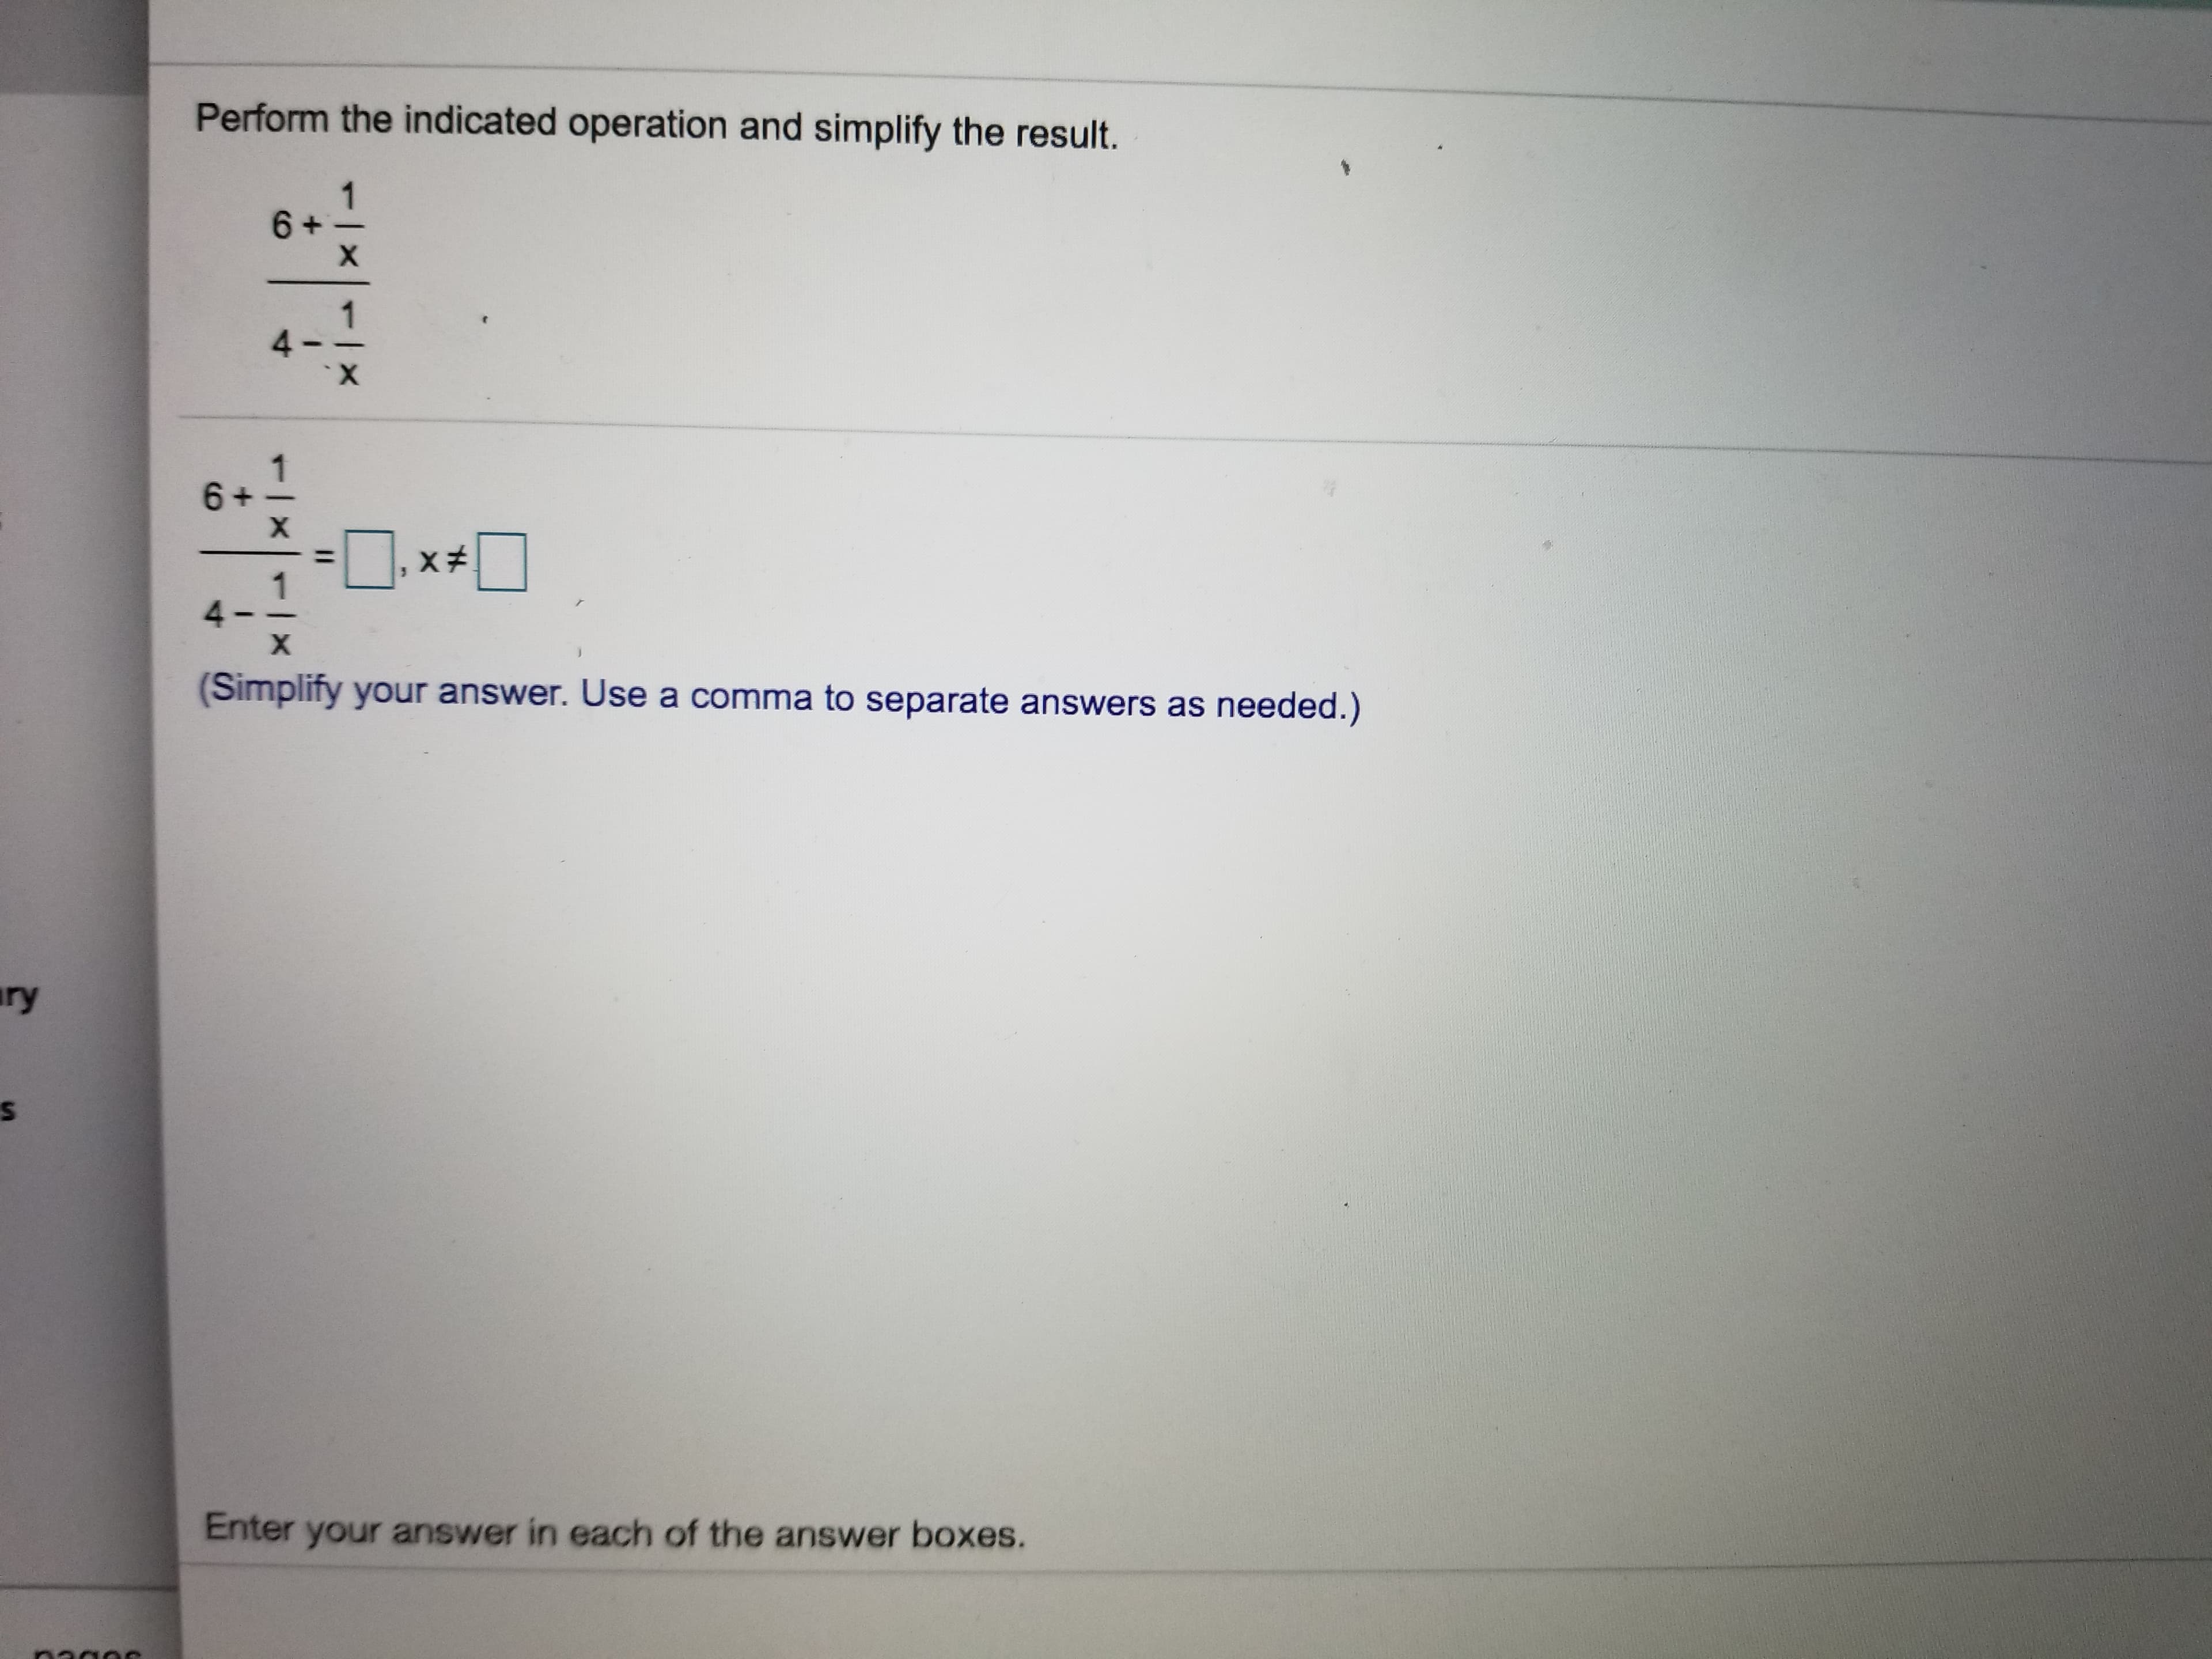 Perform the indicated operation and simplify the result.
1
6+
X
4 -
X
X
4-
X
(Simplify your answer. Use a comma to separate answers as needed.)
ry
Enter your answer in each of the answer boxes.
nagom
